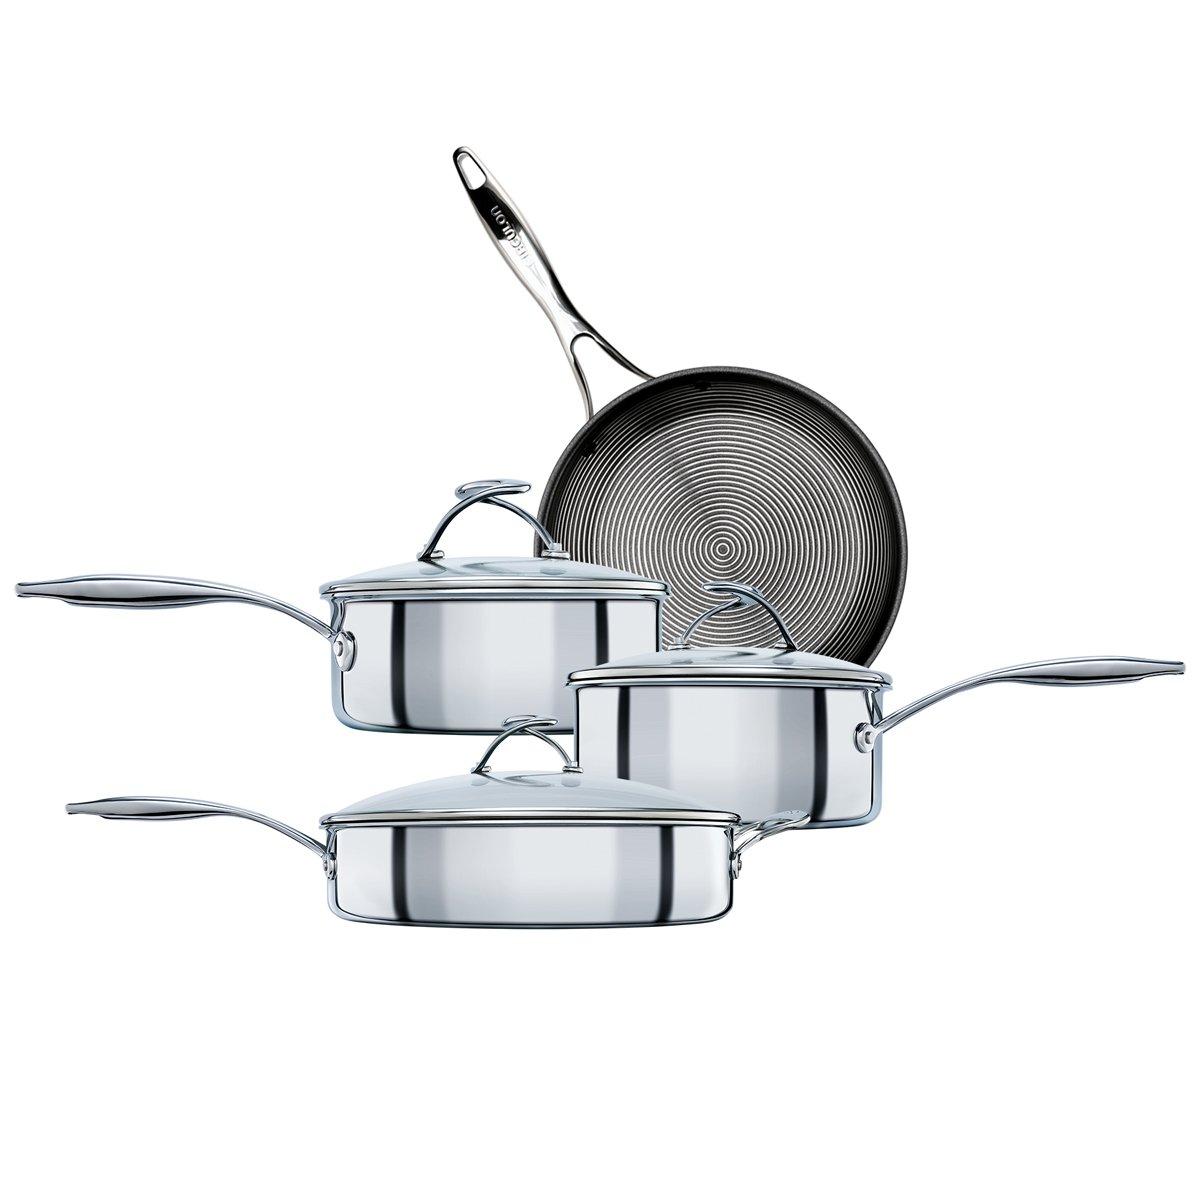 Saucepan Set with Lids Stainless Steel Non Stick Cookware - Pack of 4